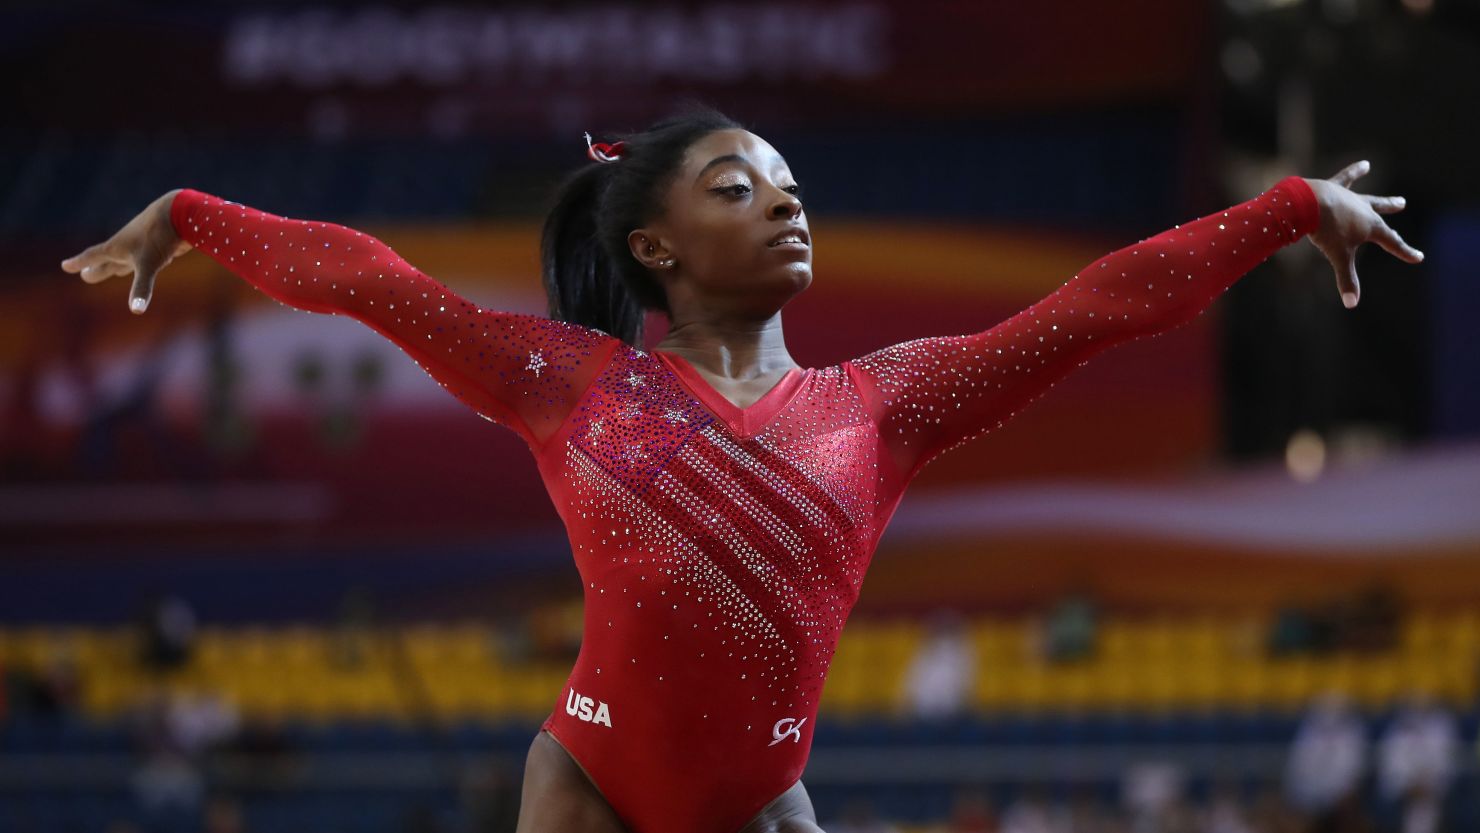 Simone Biles led the US to a record win in the team event and qualified for all five individual finals.